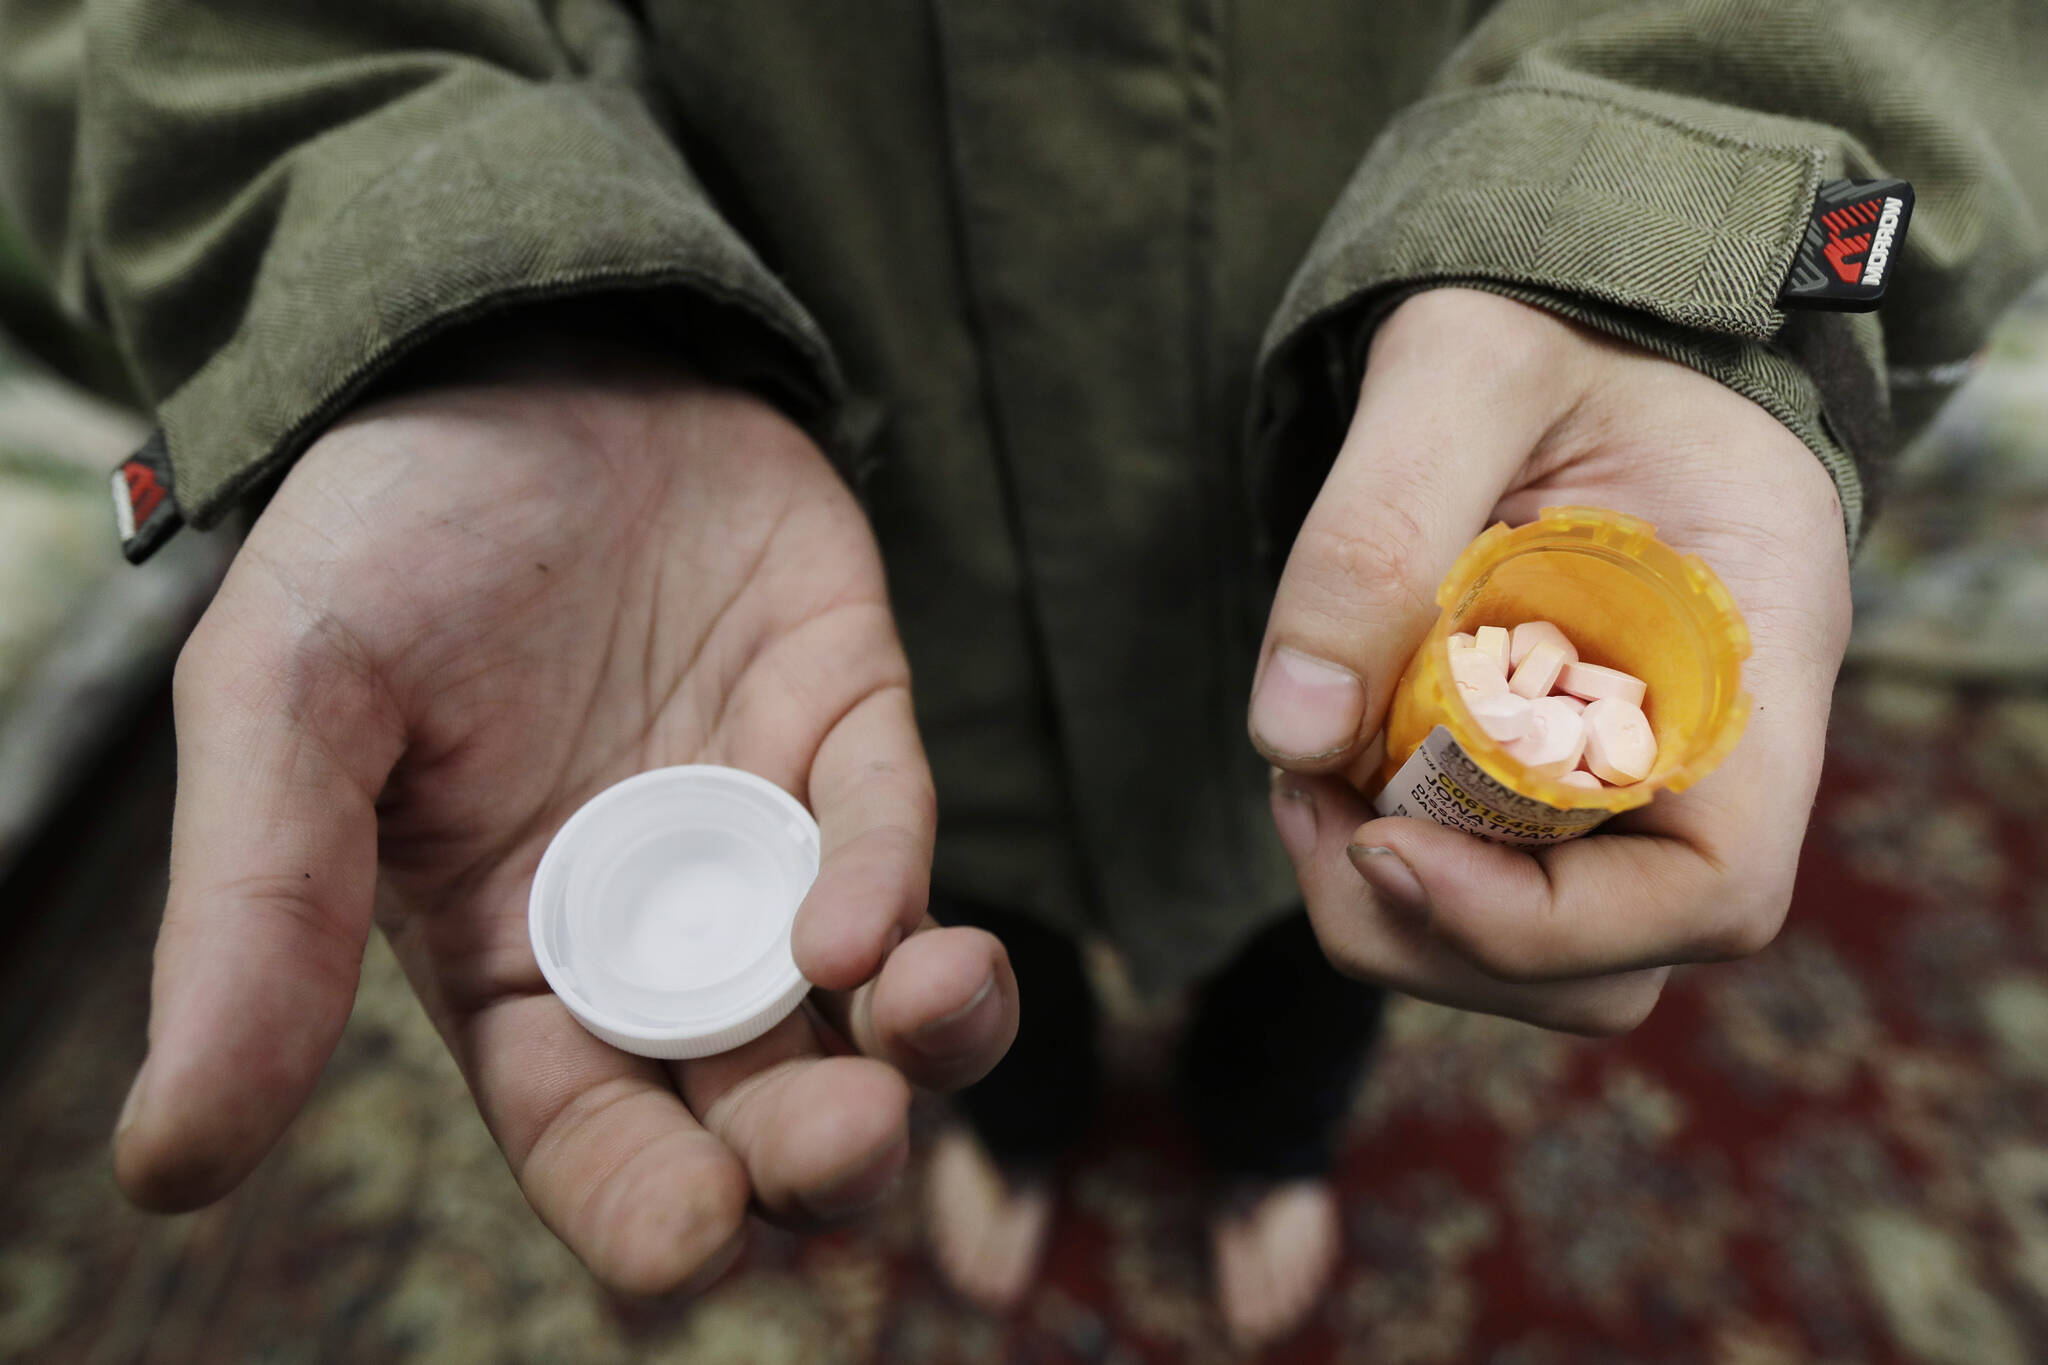 FILE - In this Nov. 14, 2019, photo, Jon Combes holds his bottle of buprenorphine, a medicine that prevents withdrawal sickness in people trying to stop using opiates, as he prepares to take a dose in a clinic in Olympia, Wash. (AP Photo/Ted S. Warren, File)